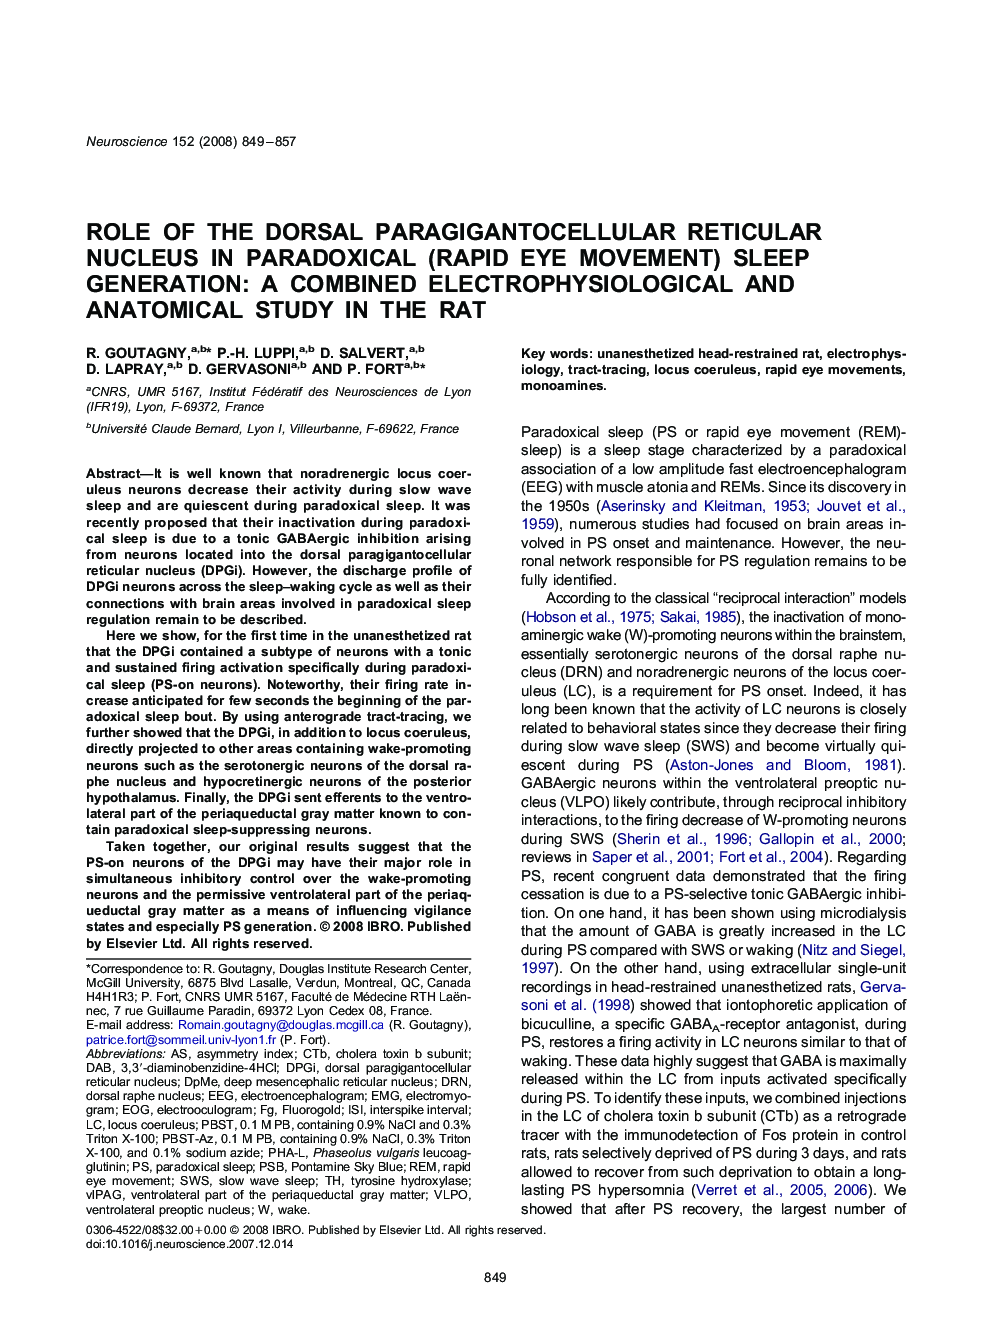 Role of the dorsal paragigantocellular reticular nucleus in paradoxical (rapid eye movement) sleep generation: a combined electrophysiological and anatomical study in the rat